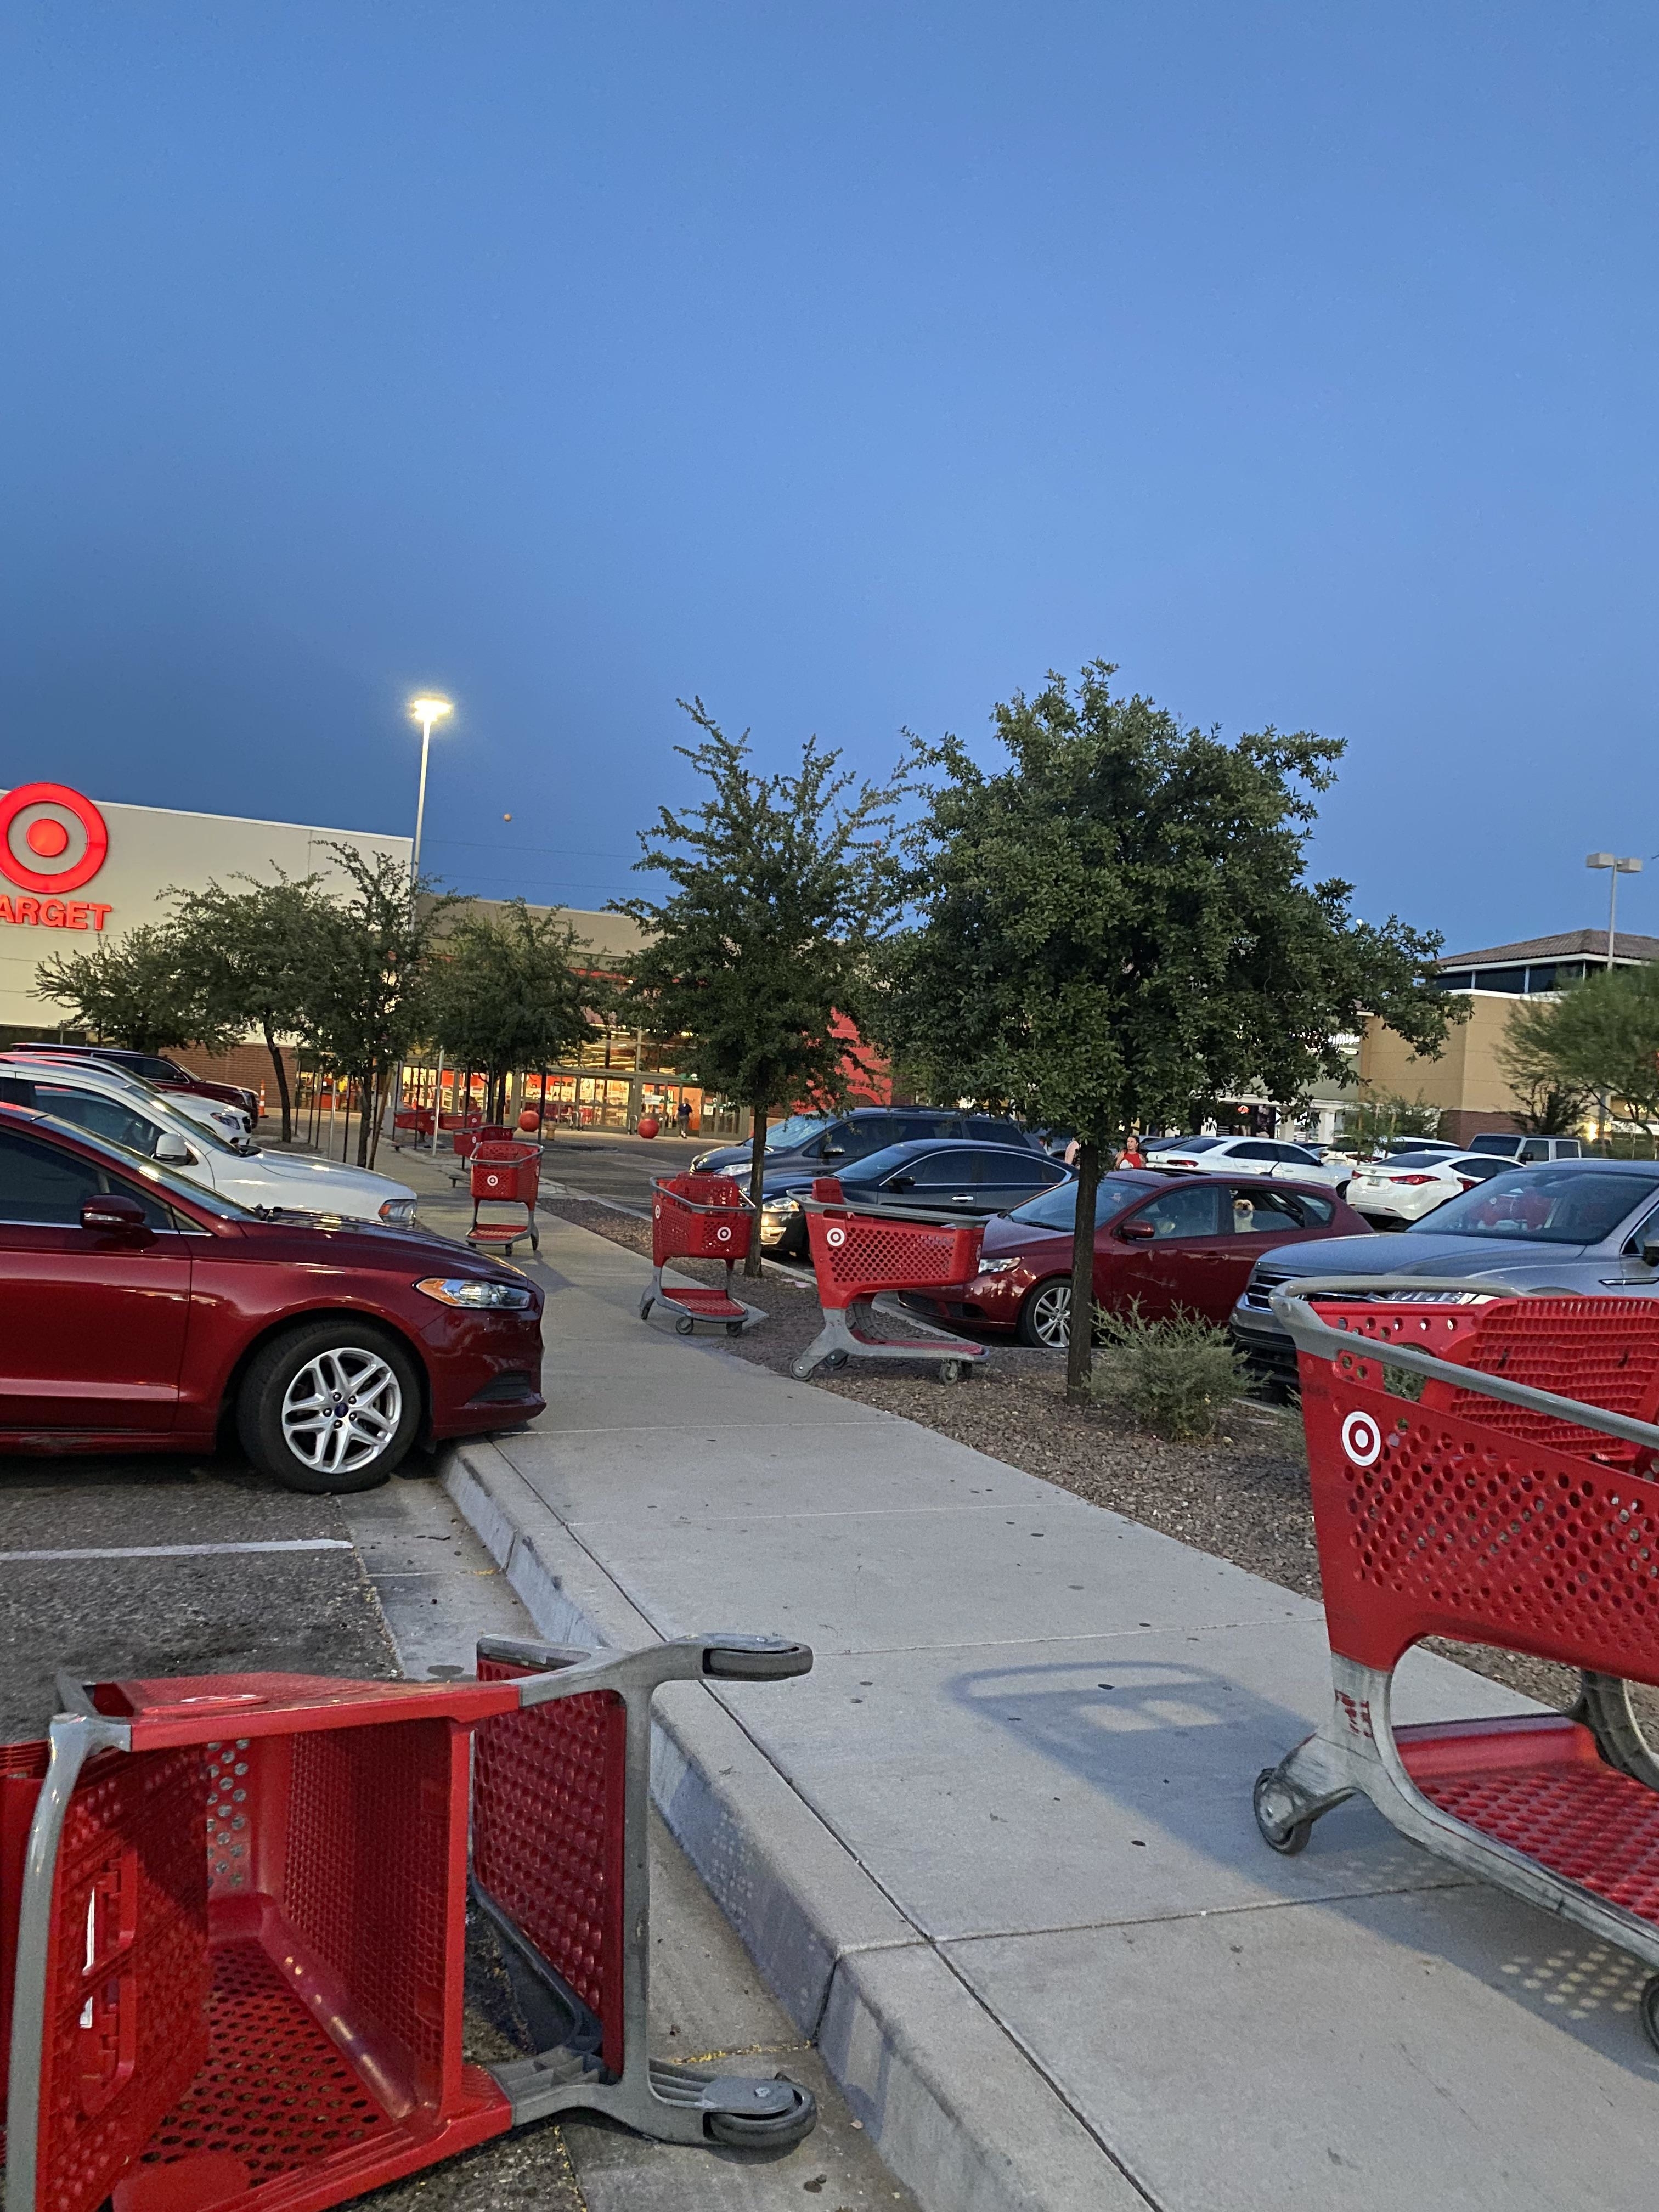 Target store exterior with shopping carts scattered in a parking lot at dusk